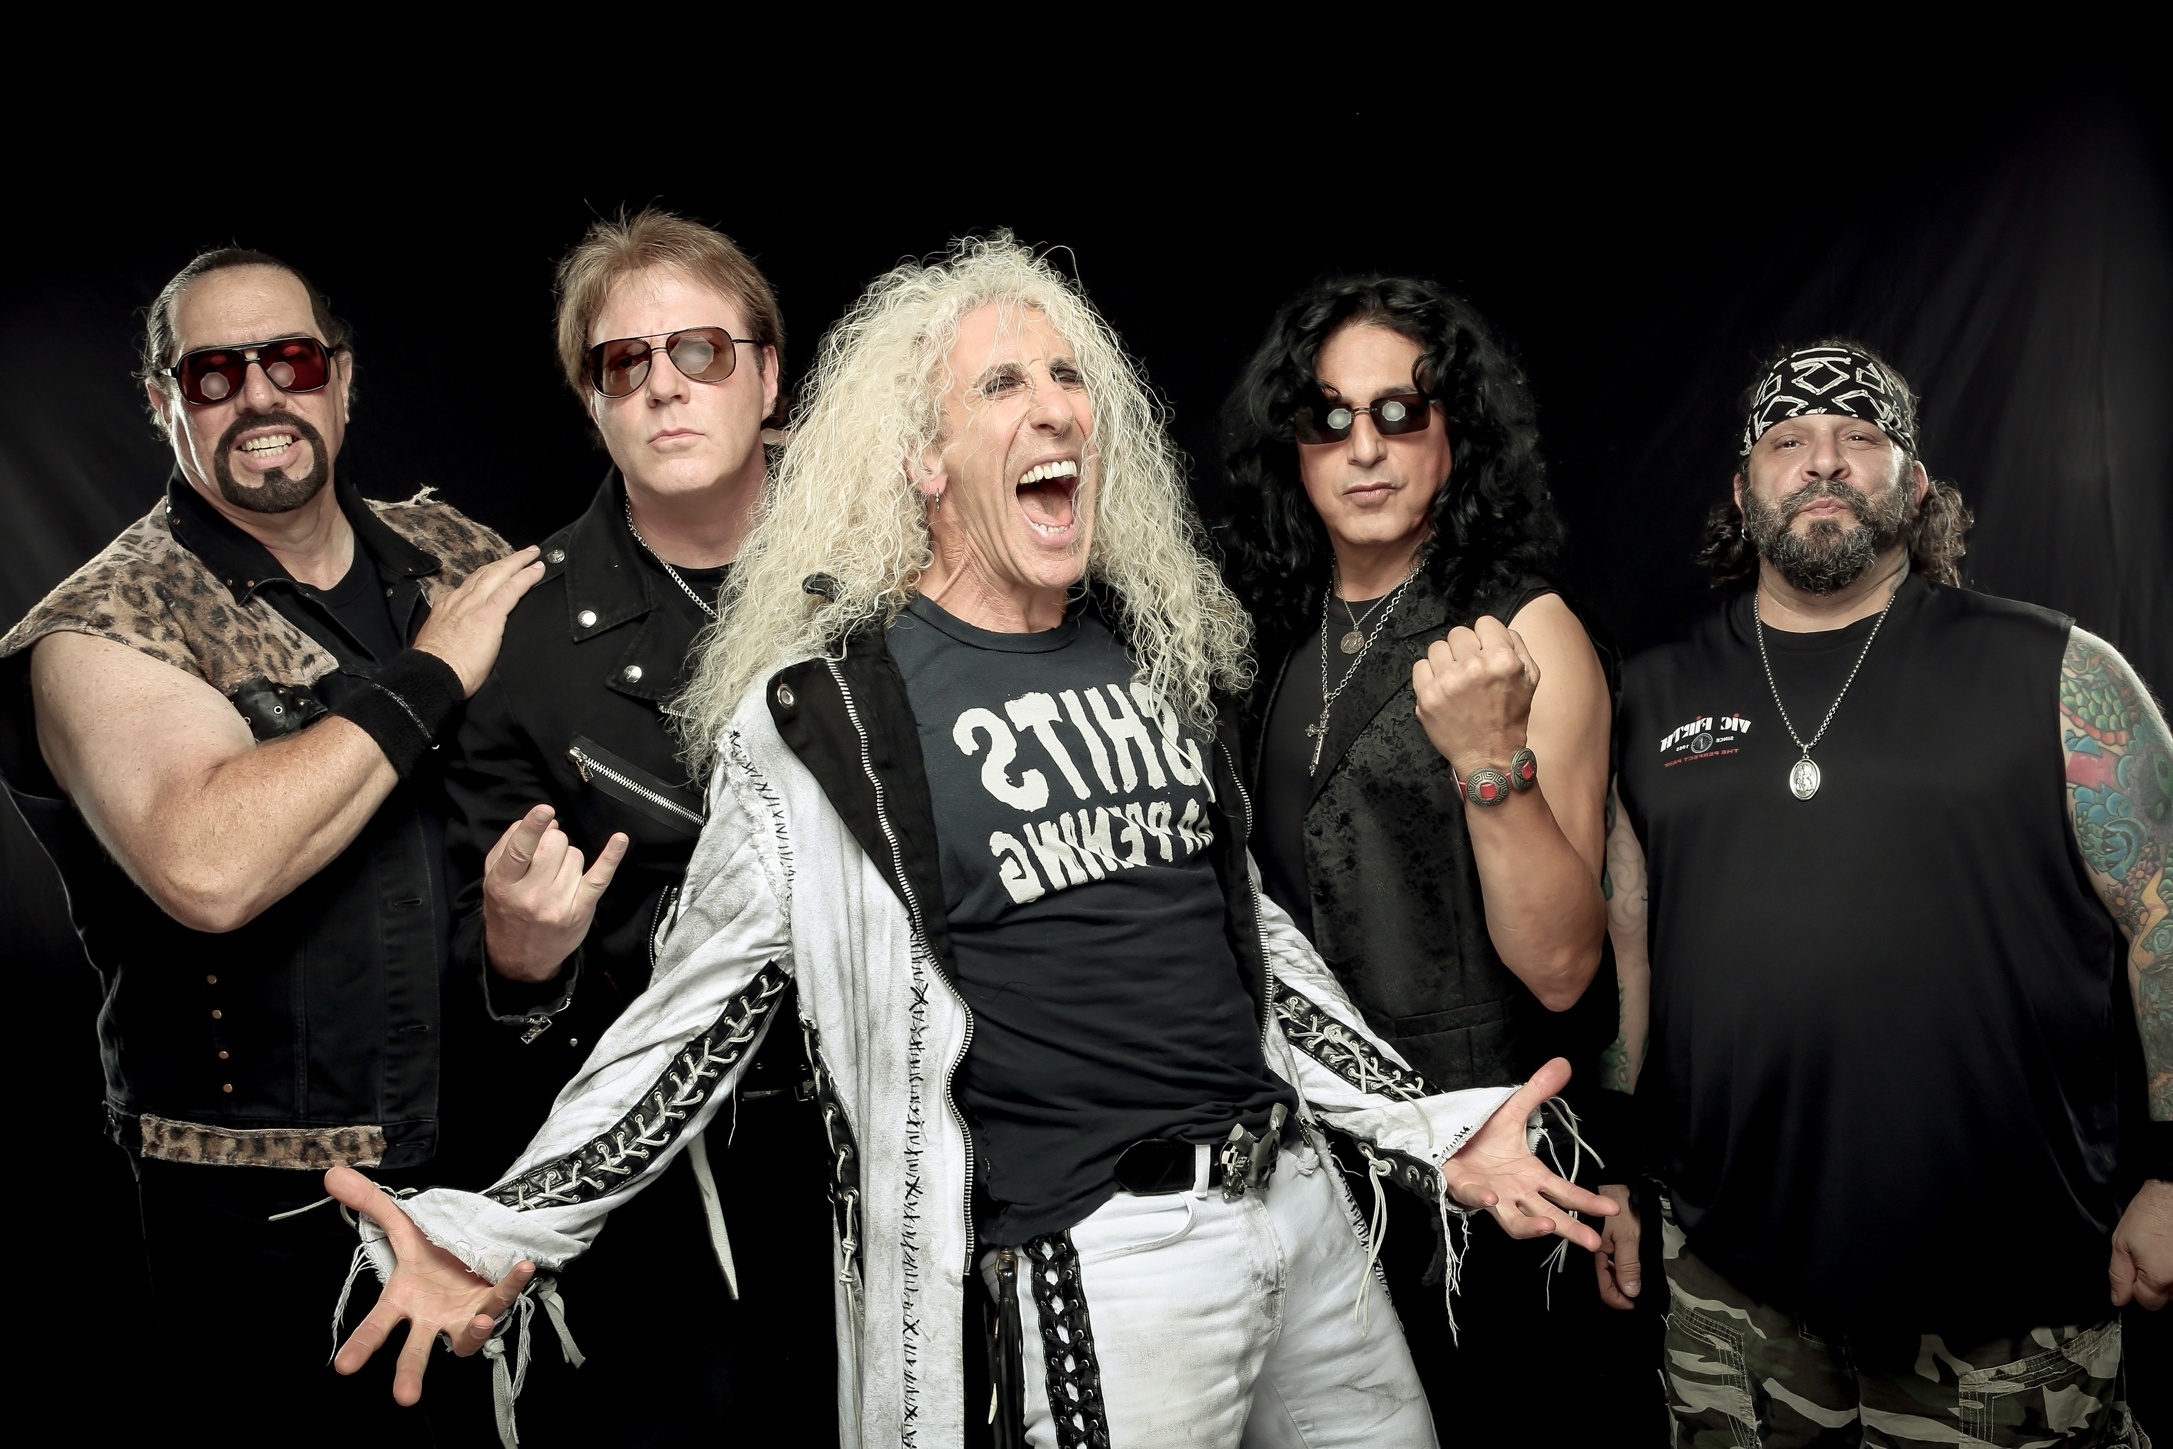 Jay Jay French, Twisted Sister, Popular wallpapers, 2180x1450 HD Desktop